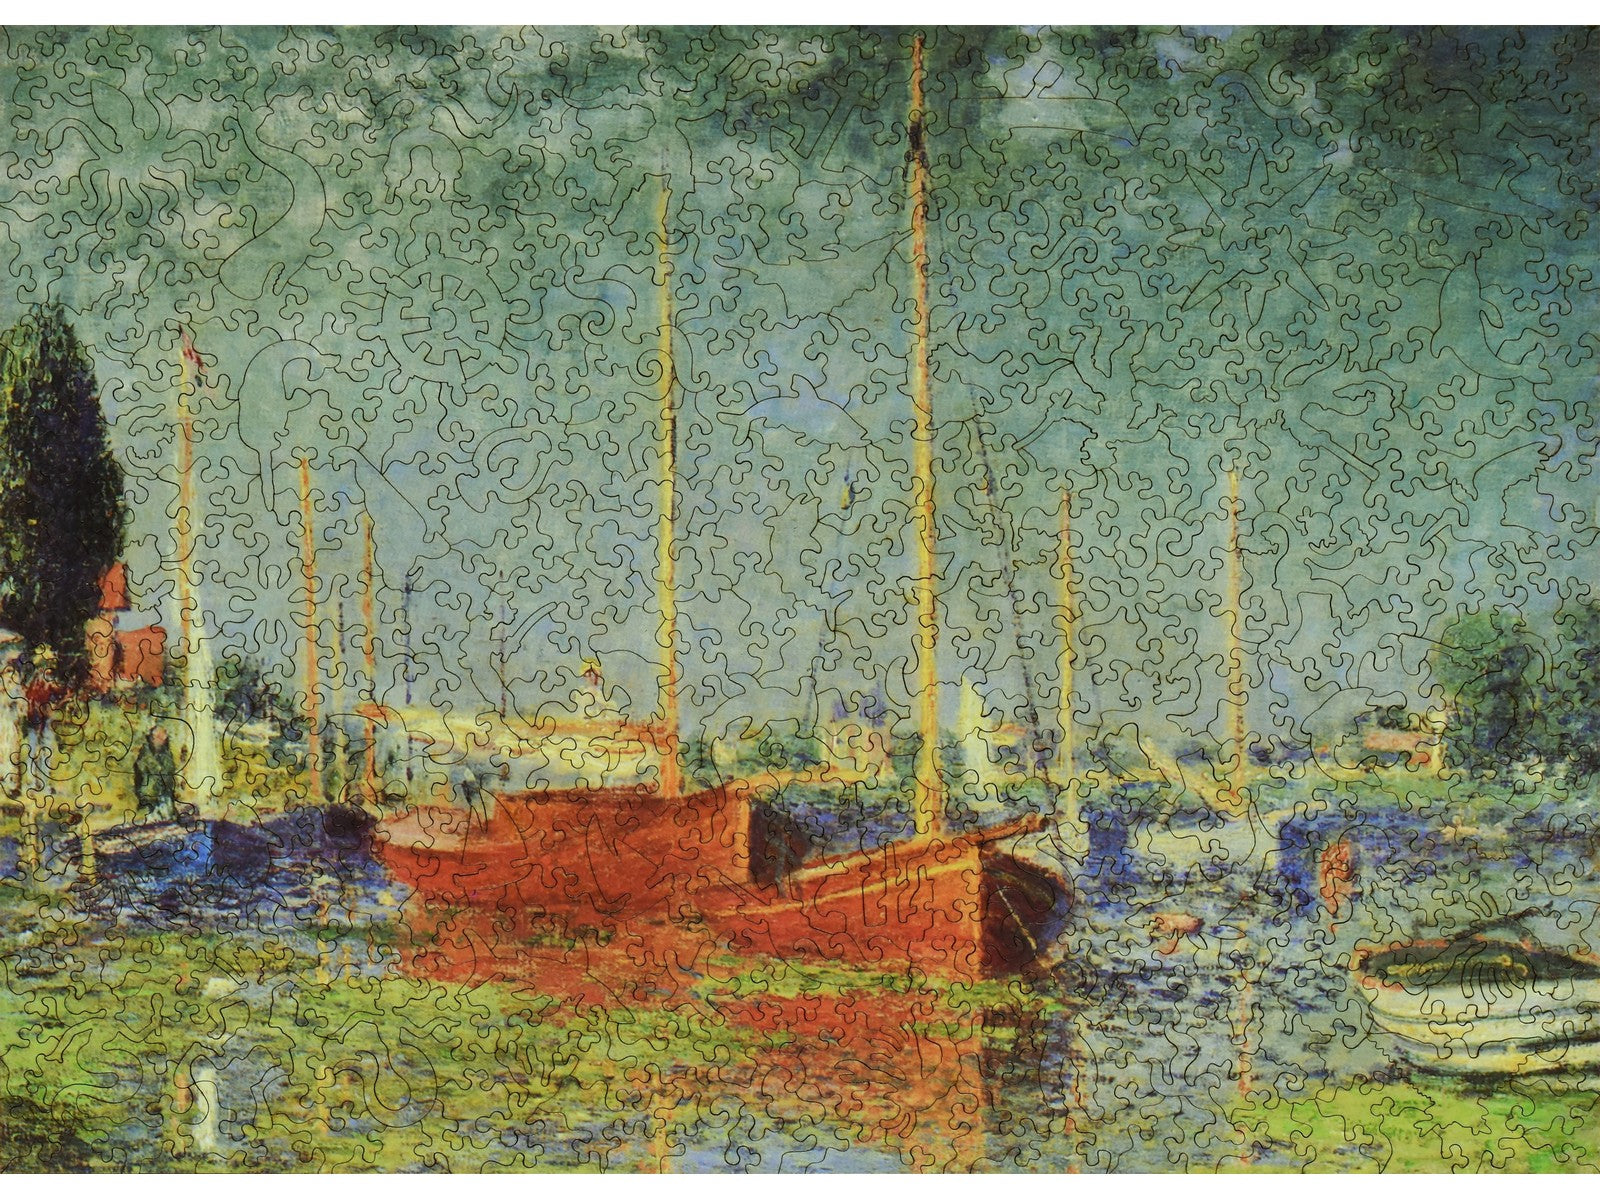 The front of the puzzle, Red Boats, which shows sailboats in a marina.